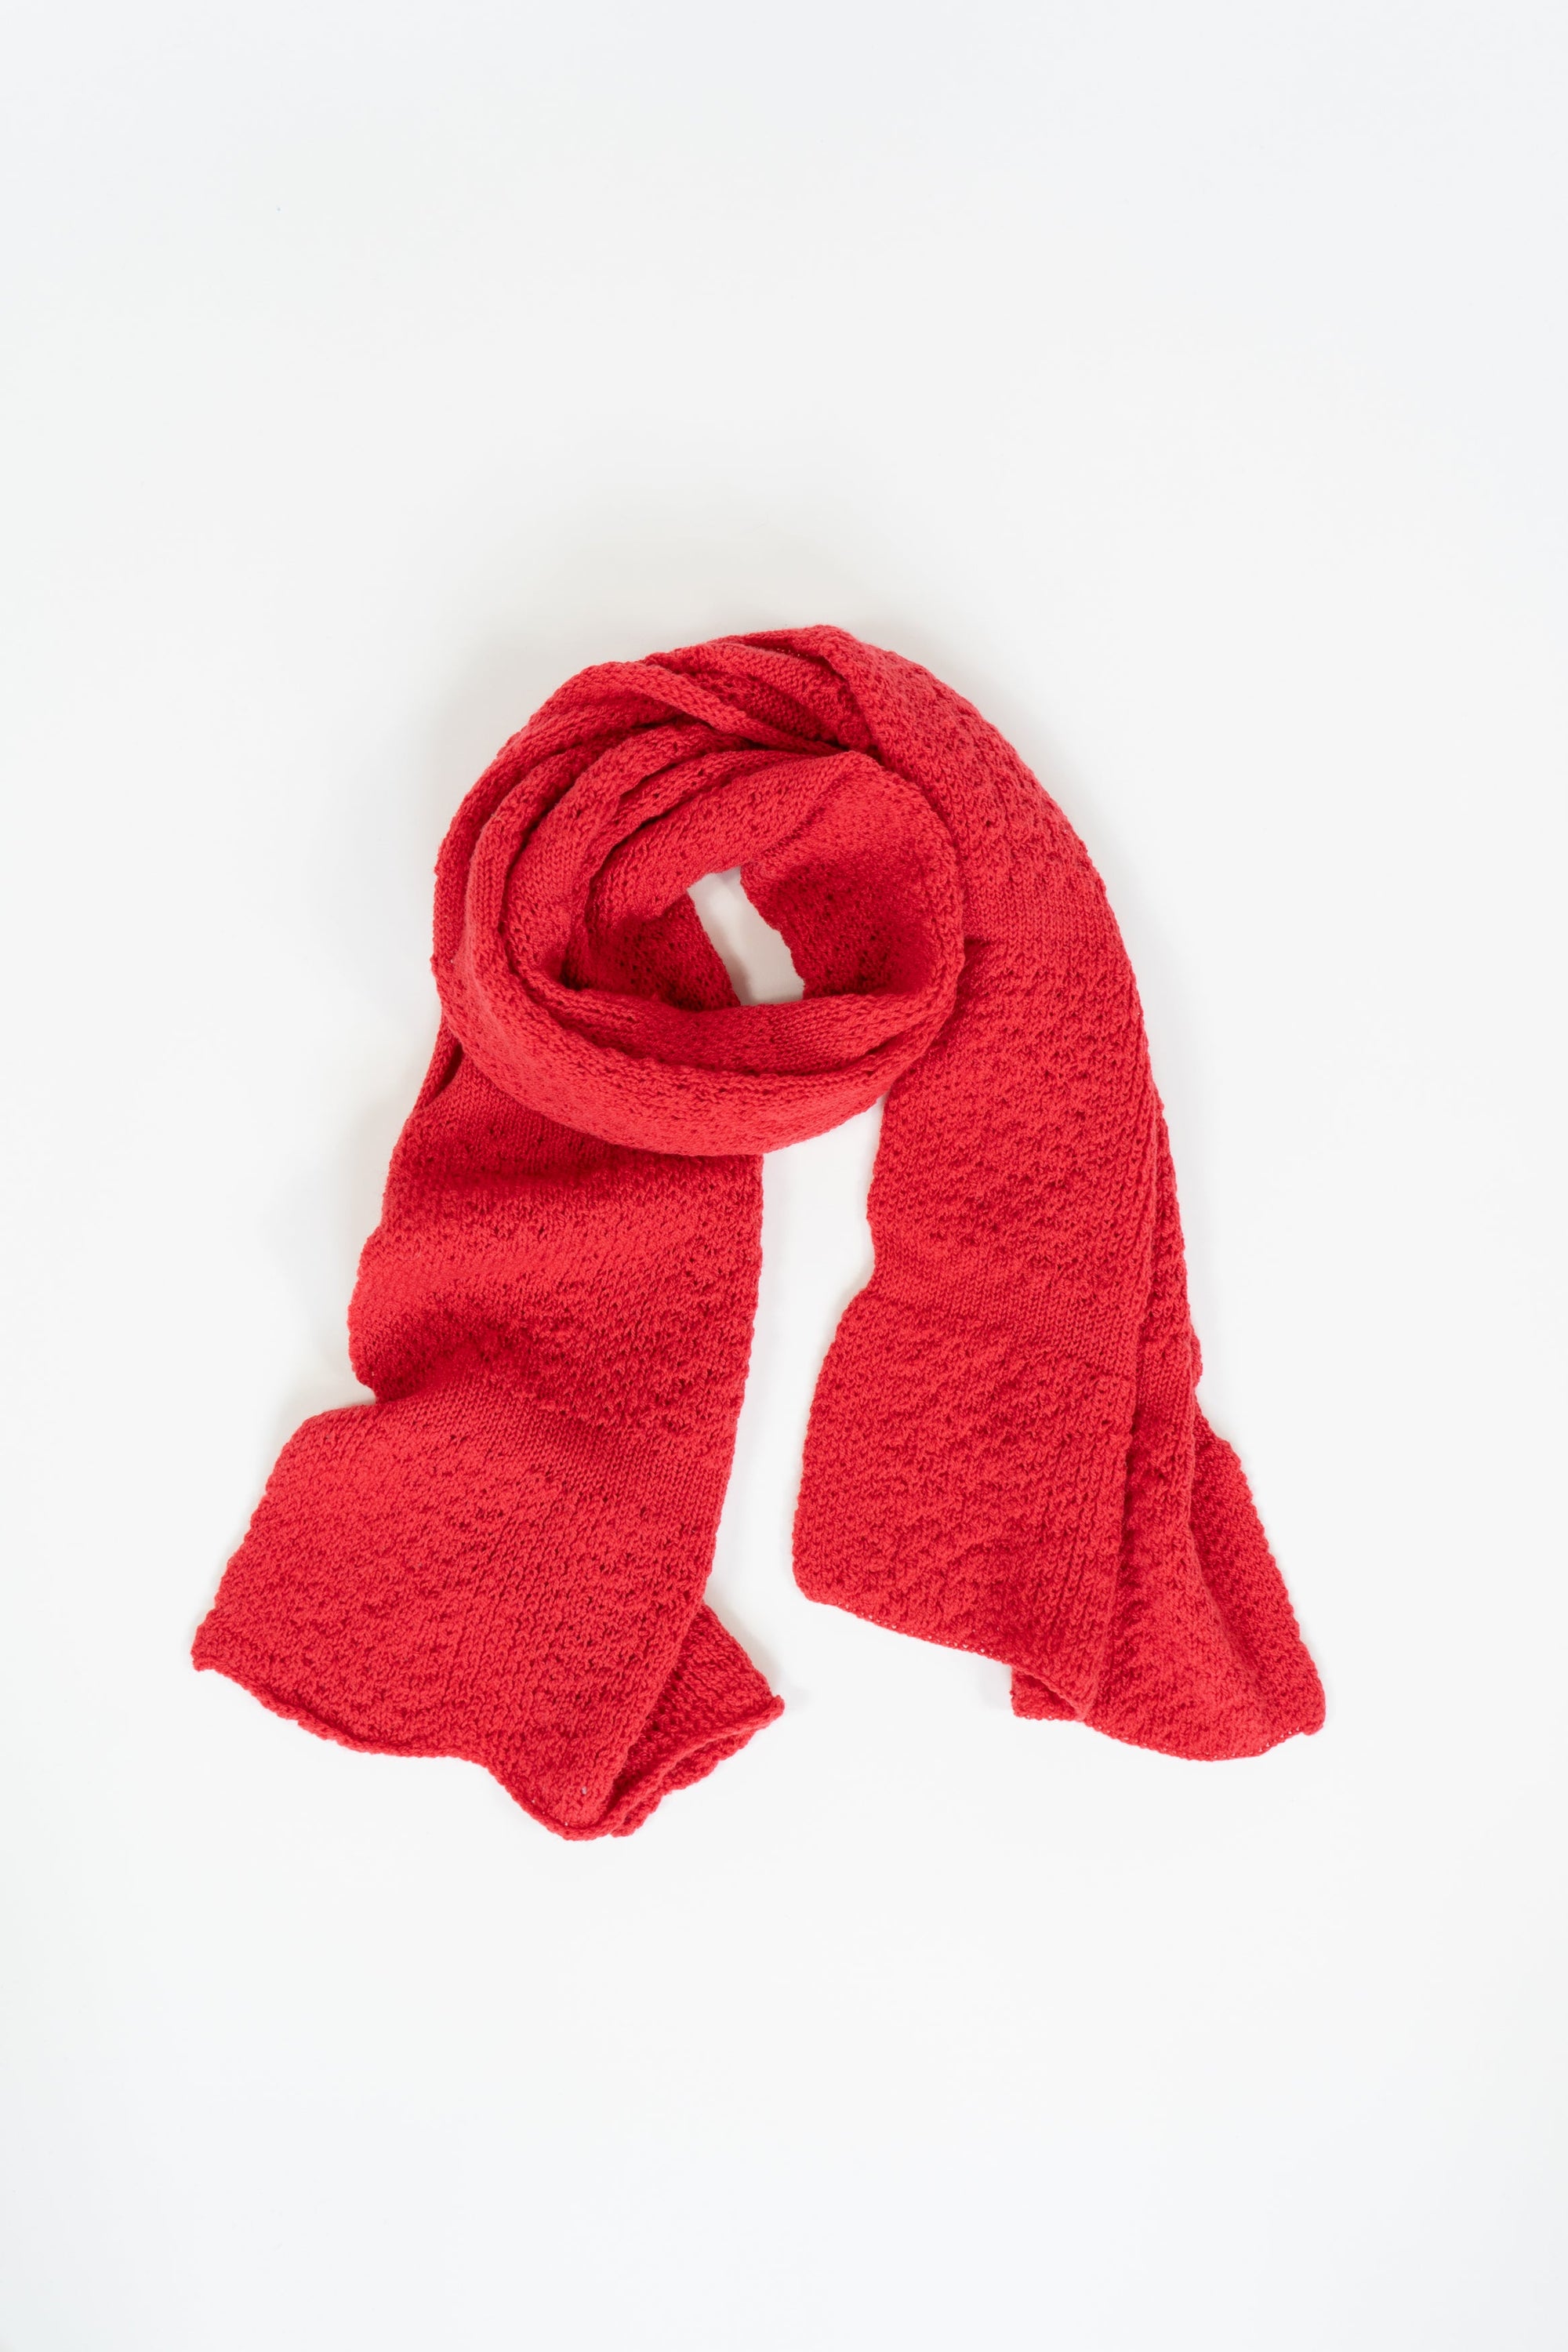 Red Small Merino Scarf-Scarves & Shawls-STABLE of Ireland